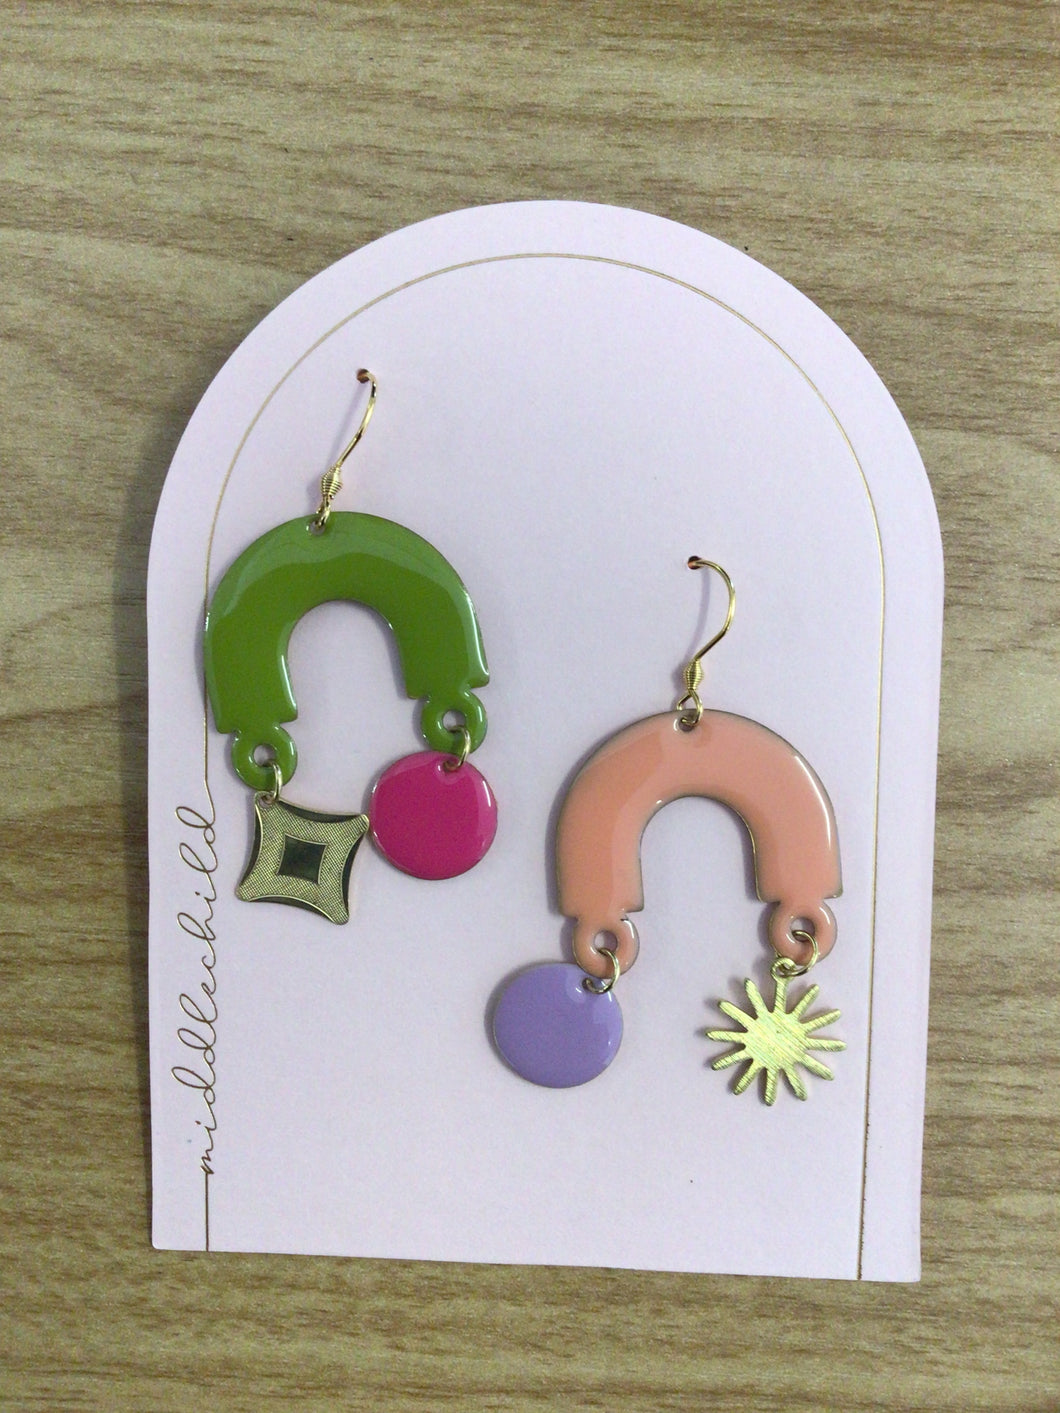 Middle Child Earrings - Confection - Avocado/Peach - MC0723-011